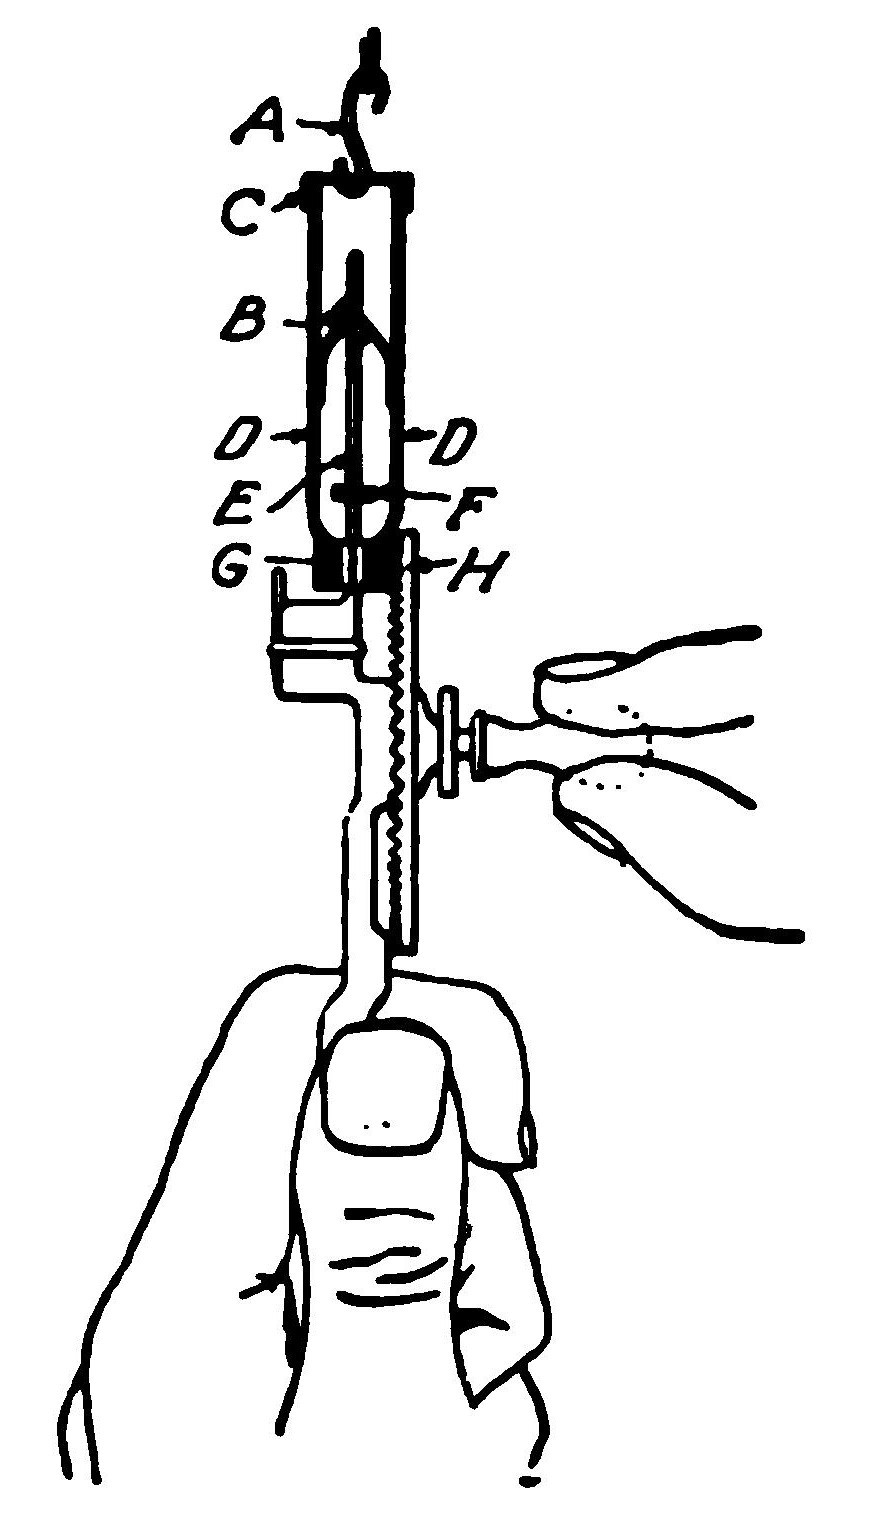 Fig. 8. Device for Winding up Rubber-Band Motors